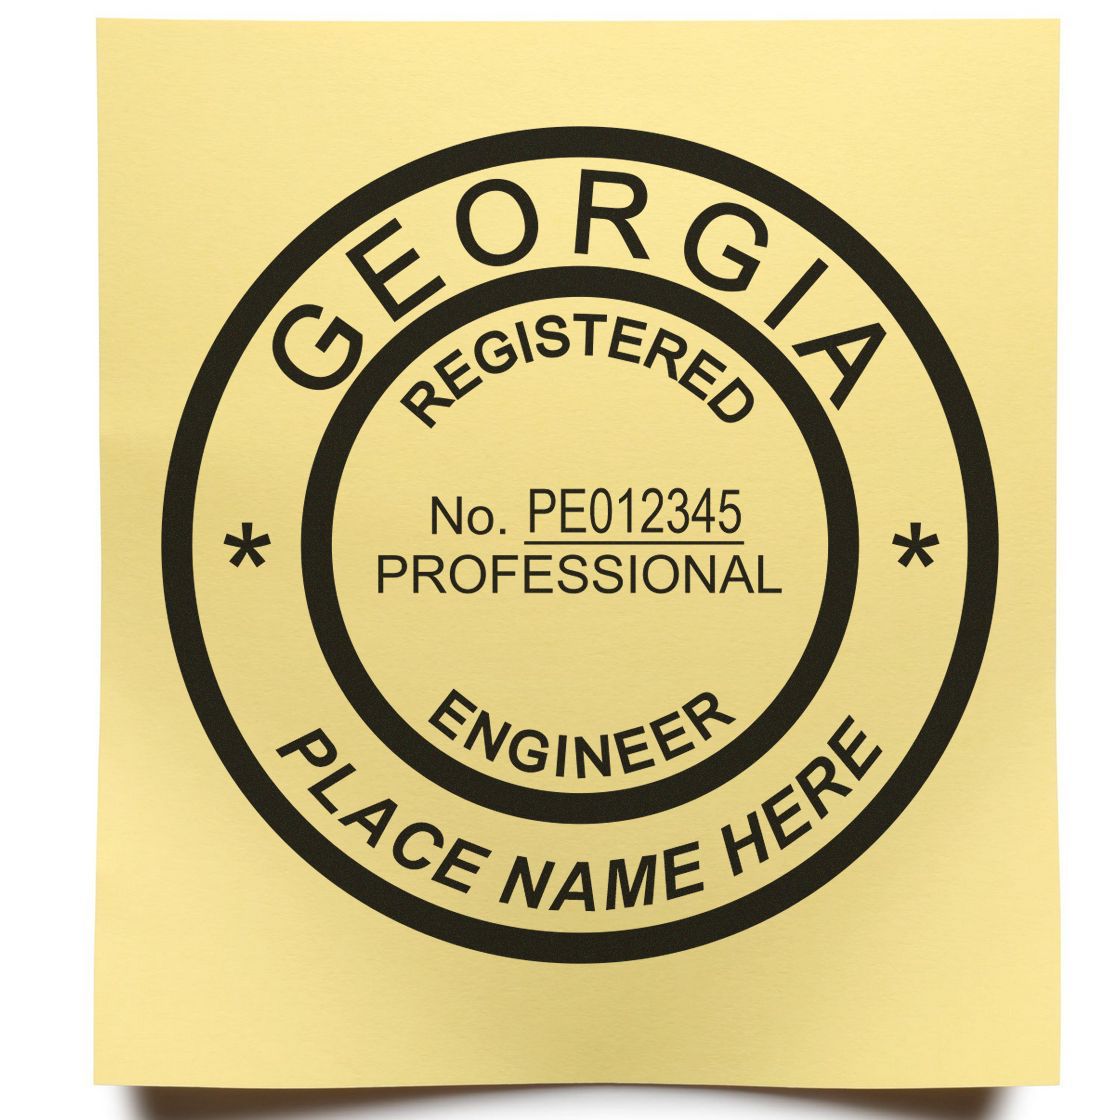 A stamped impression of the Digital Georgia PE Stamp and Electronic Seal for Georgia Engineer in this stylish lifestyle photo, setting the tone for a unique and personalized product.